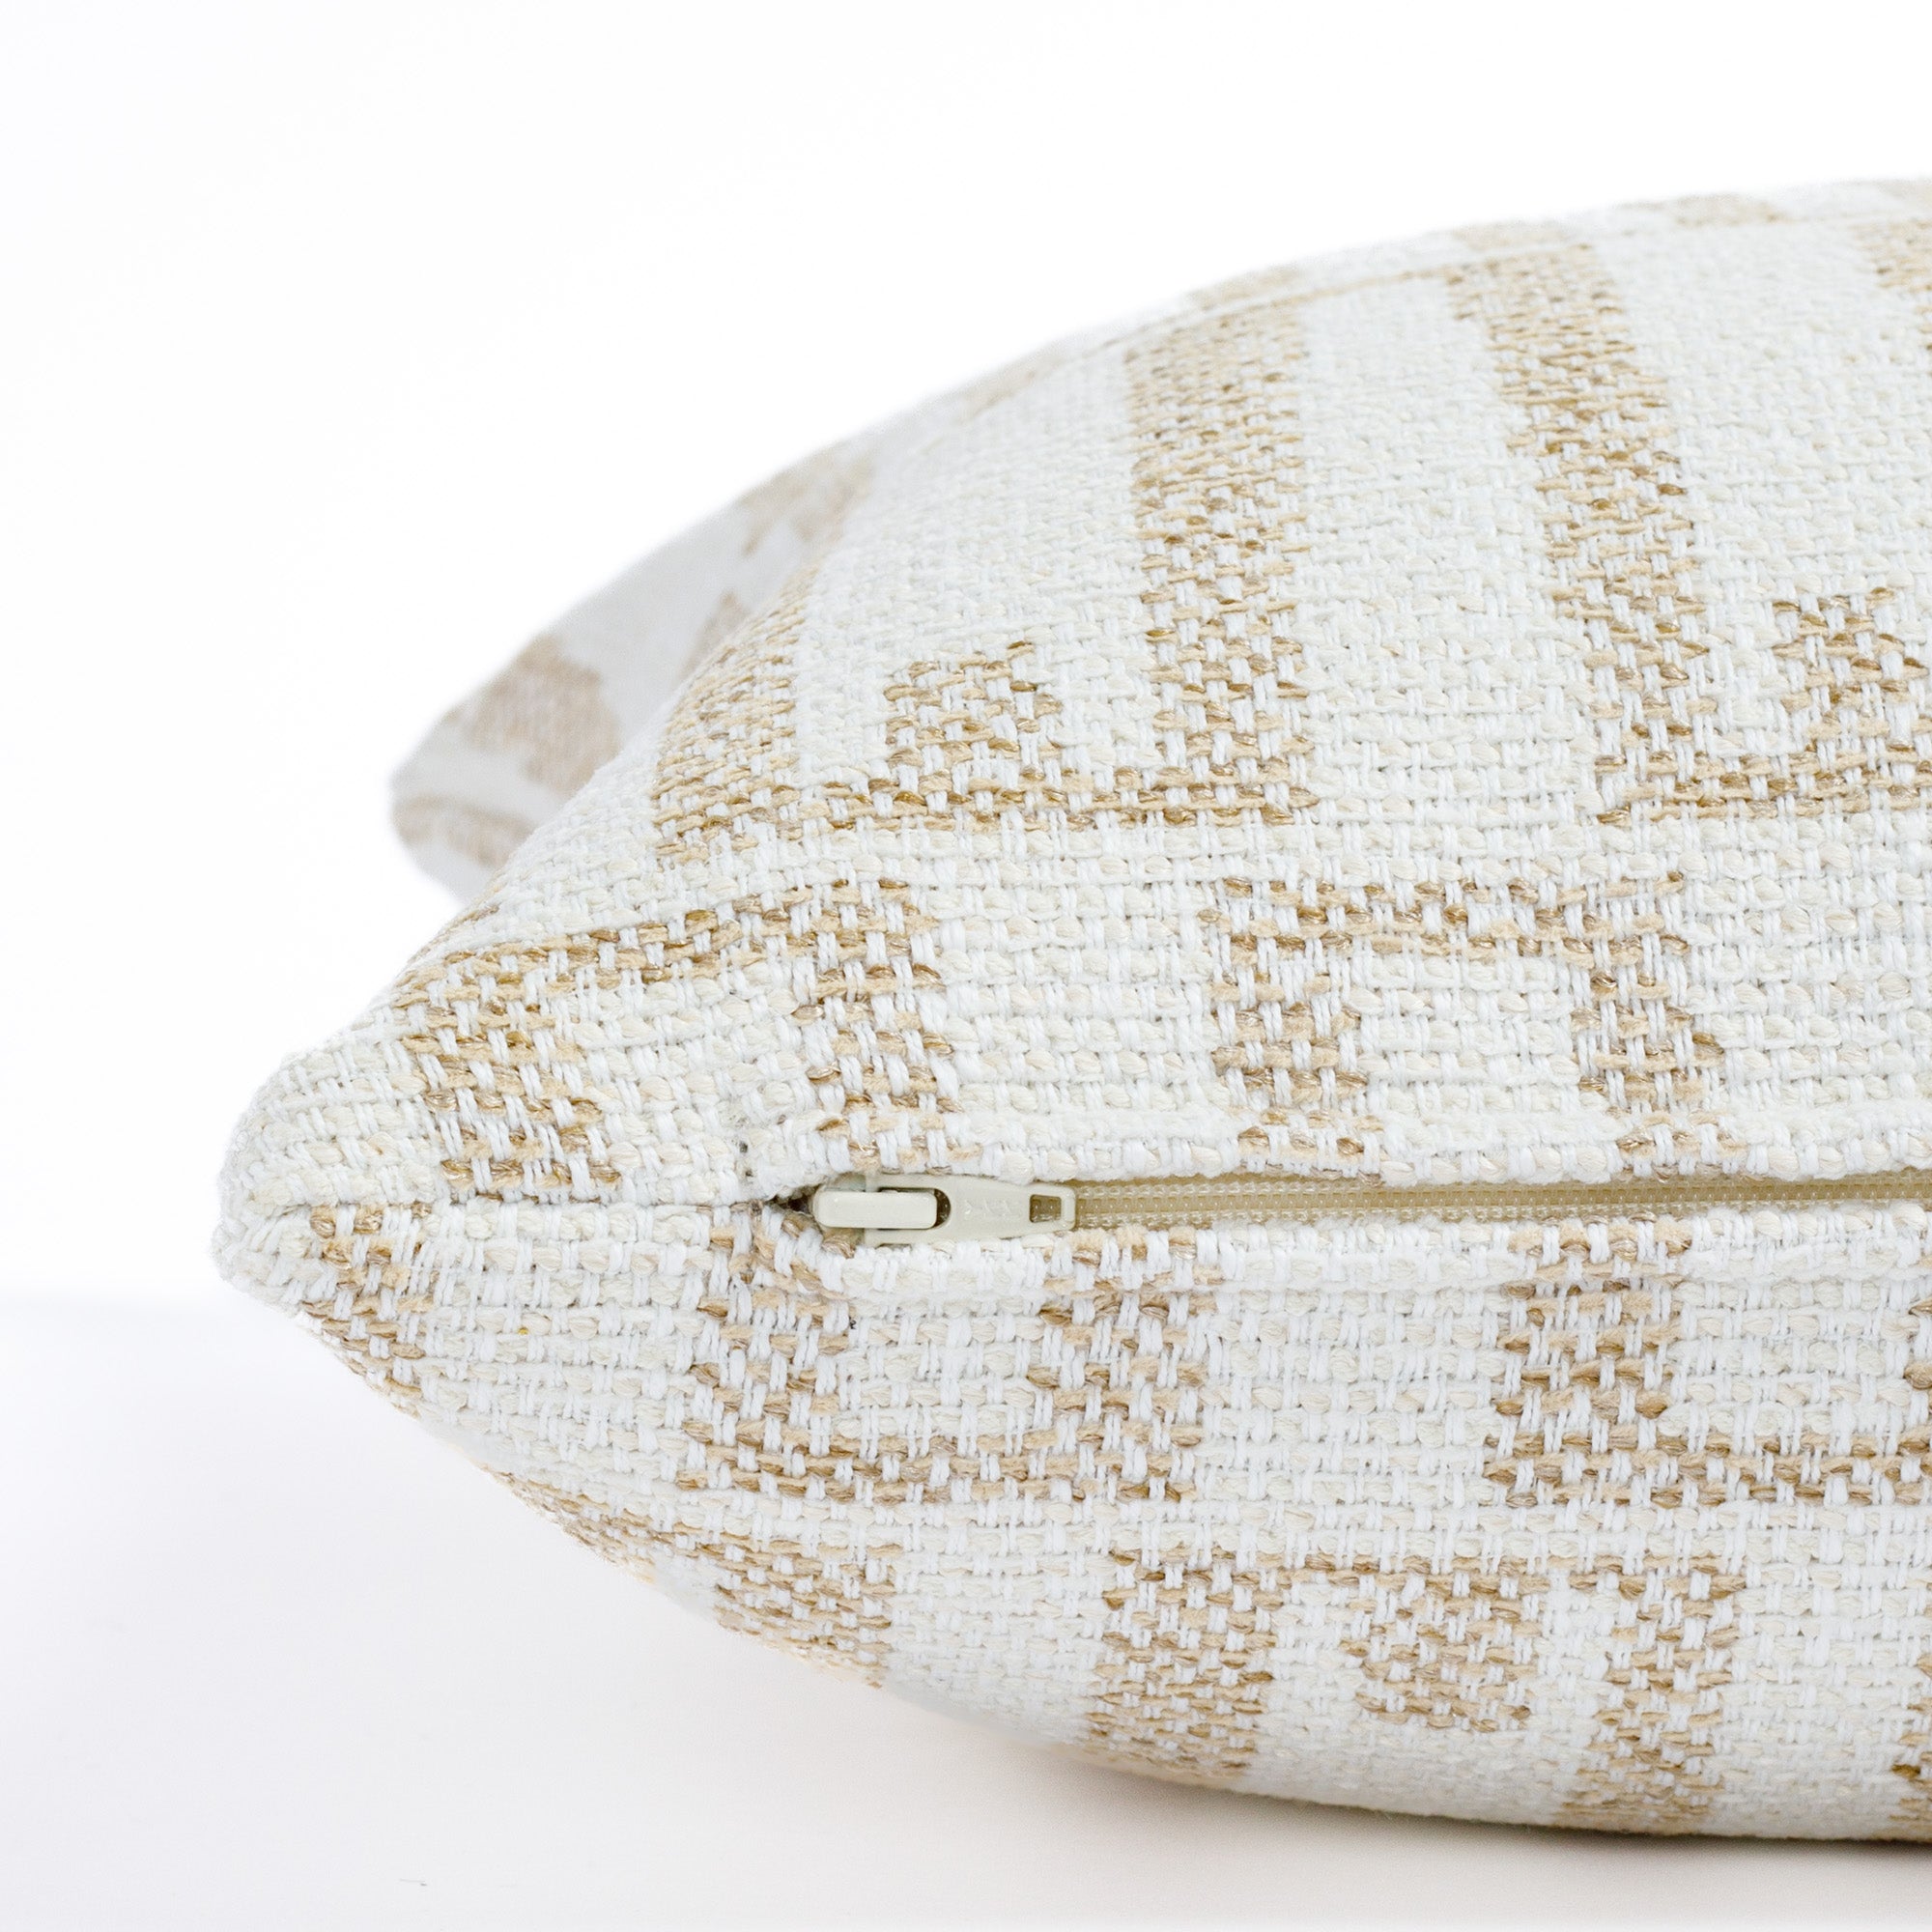 a white and beige graphic organic geometric patterned outdoor throw pillow : close up zipper view